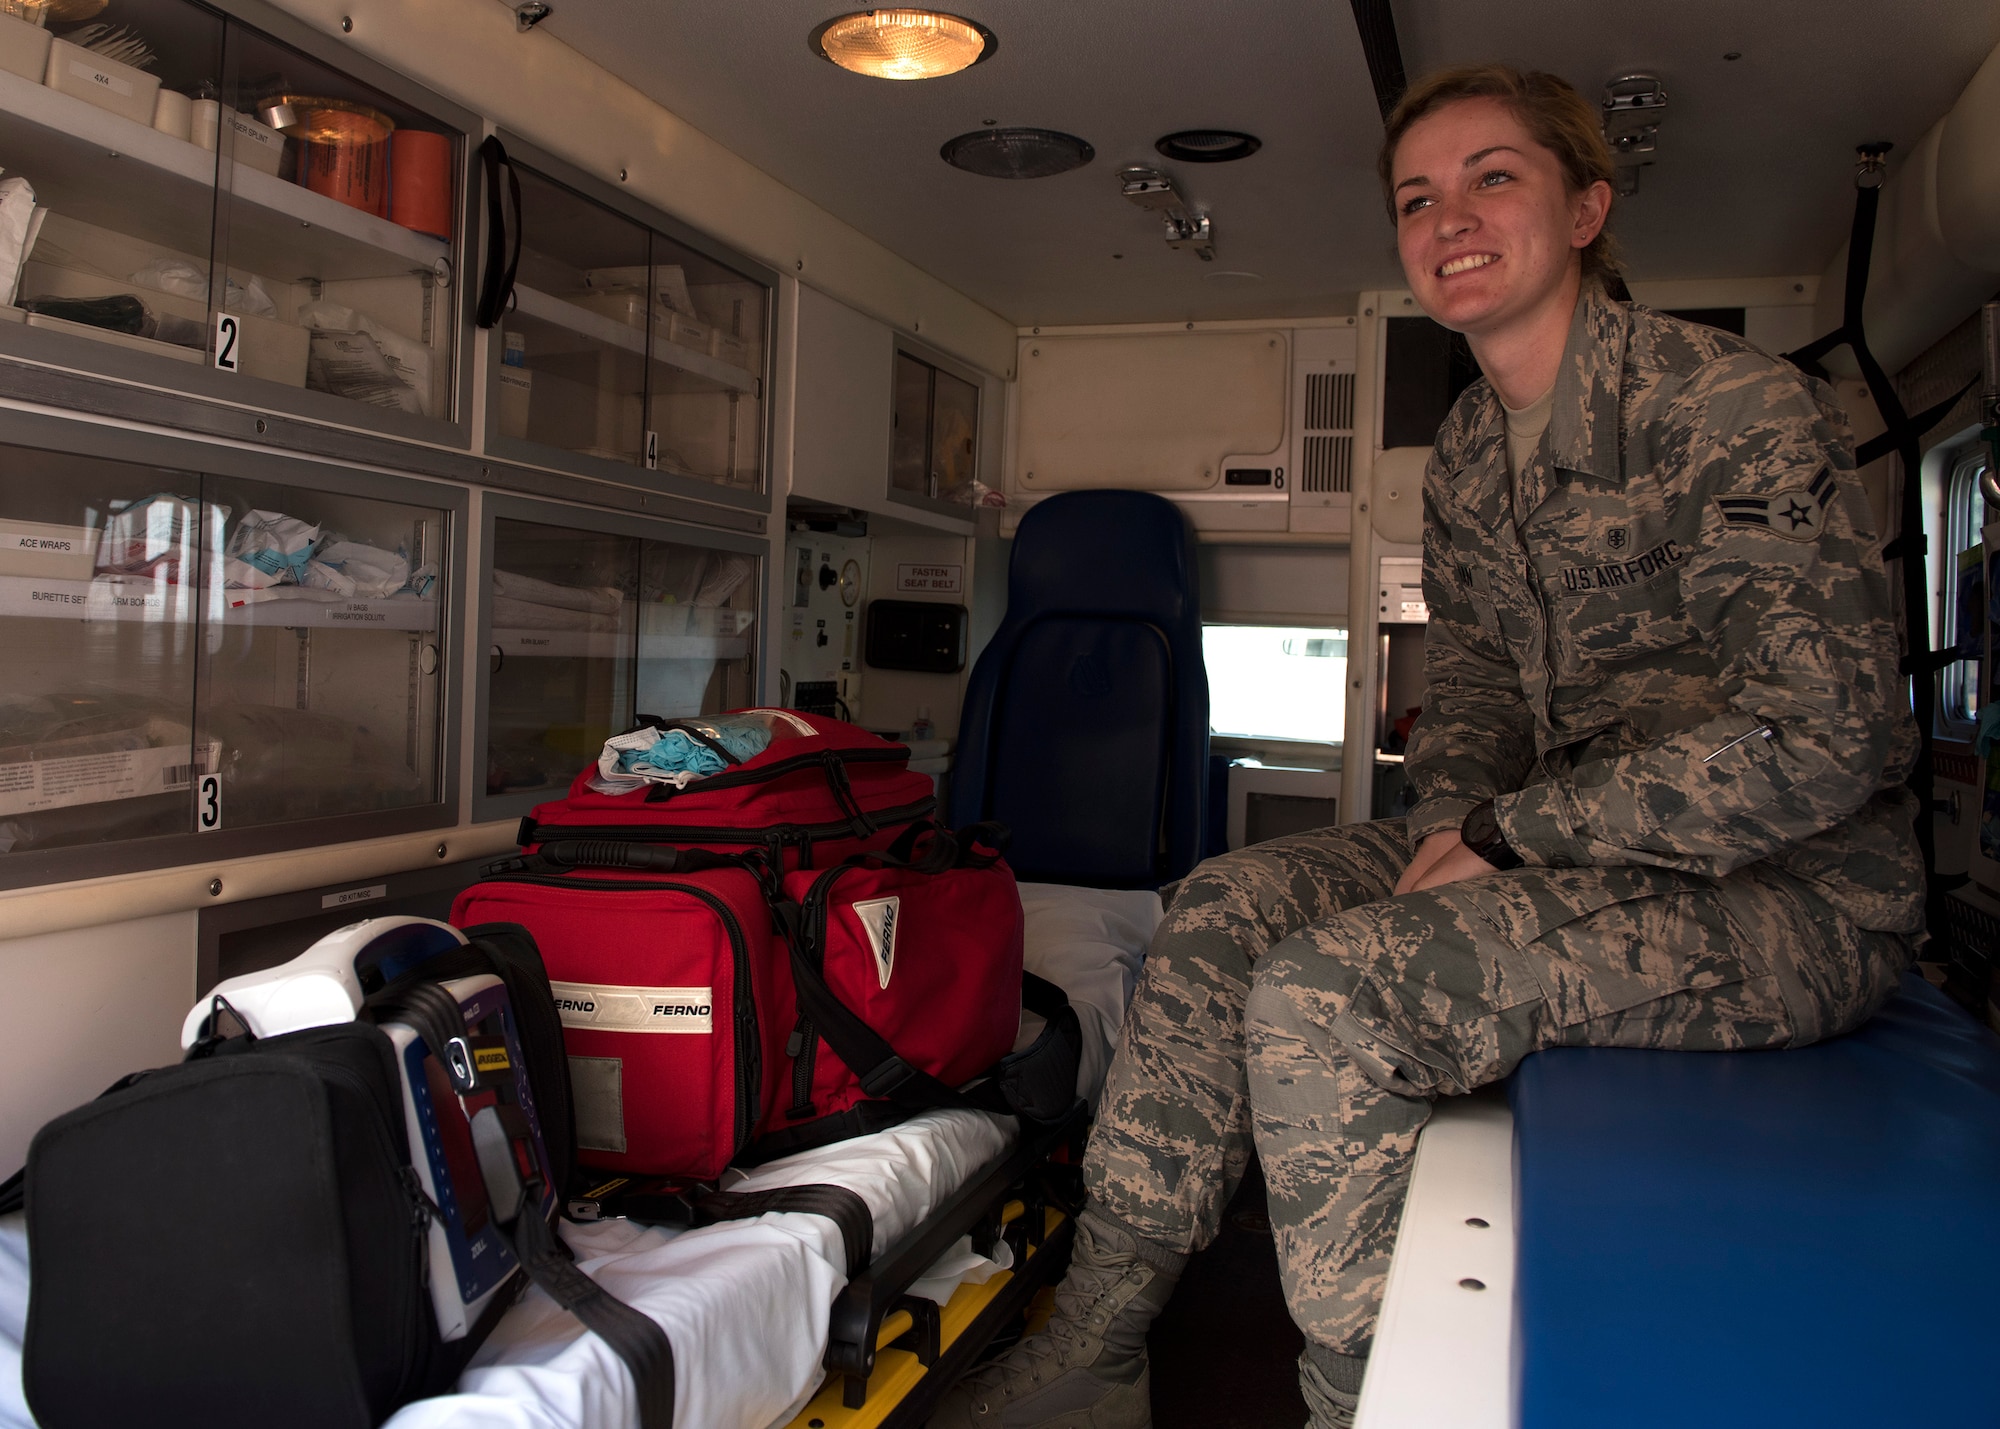 Airman 1st Class Shawn Regina McMahan, 92nd Medical Operations Squadron emergency medical technician, displays a crash kit, defibulator and vitals monitor in the rear compartment of an ambulance, Aug. 18, 2016, at Fairchild Air Force Base, Wash. Fairchild EMTs work 24-hour shifts with two days off in-between. (U.S. Air Force photo/Airman 1st Class Ryan Lackey)